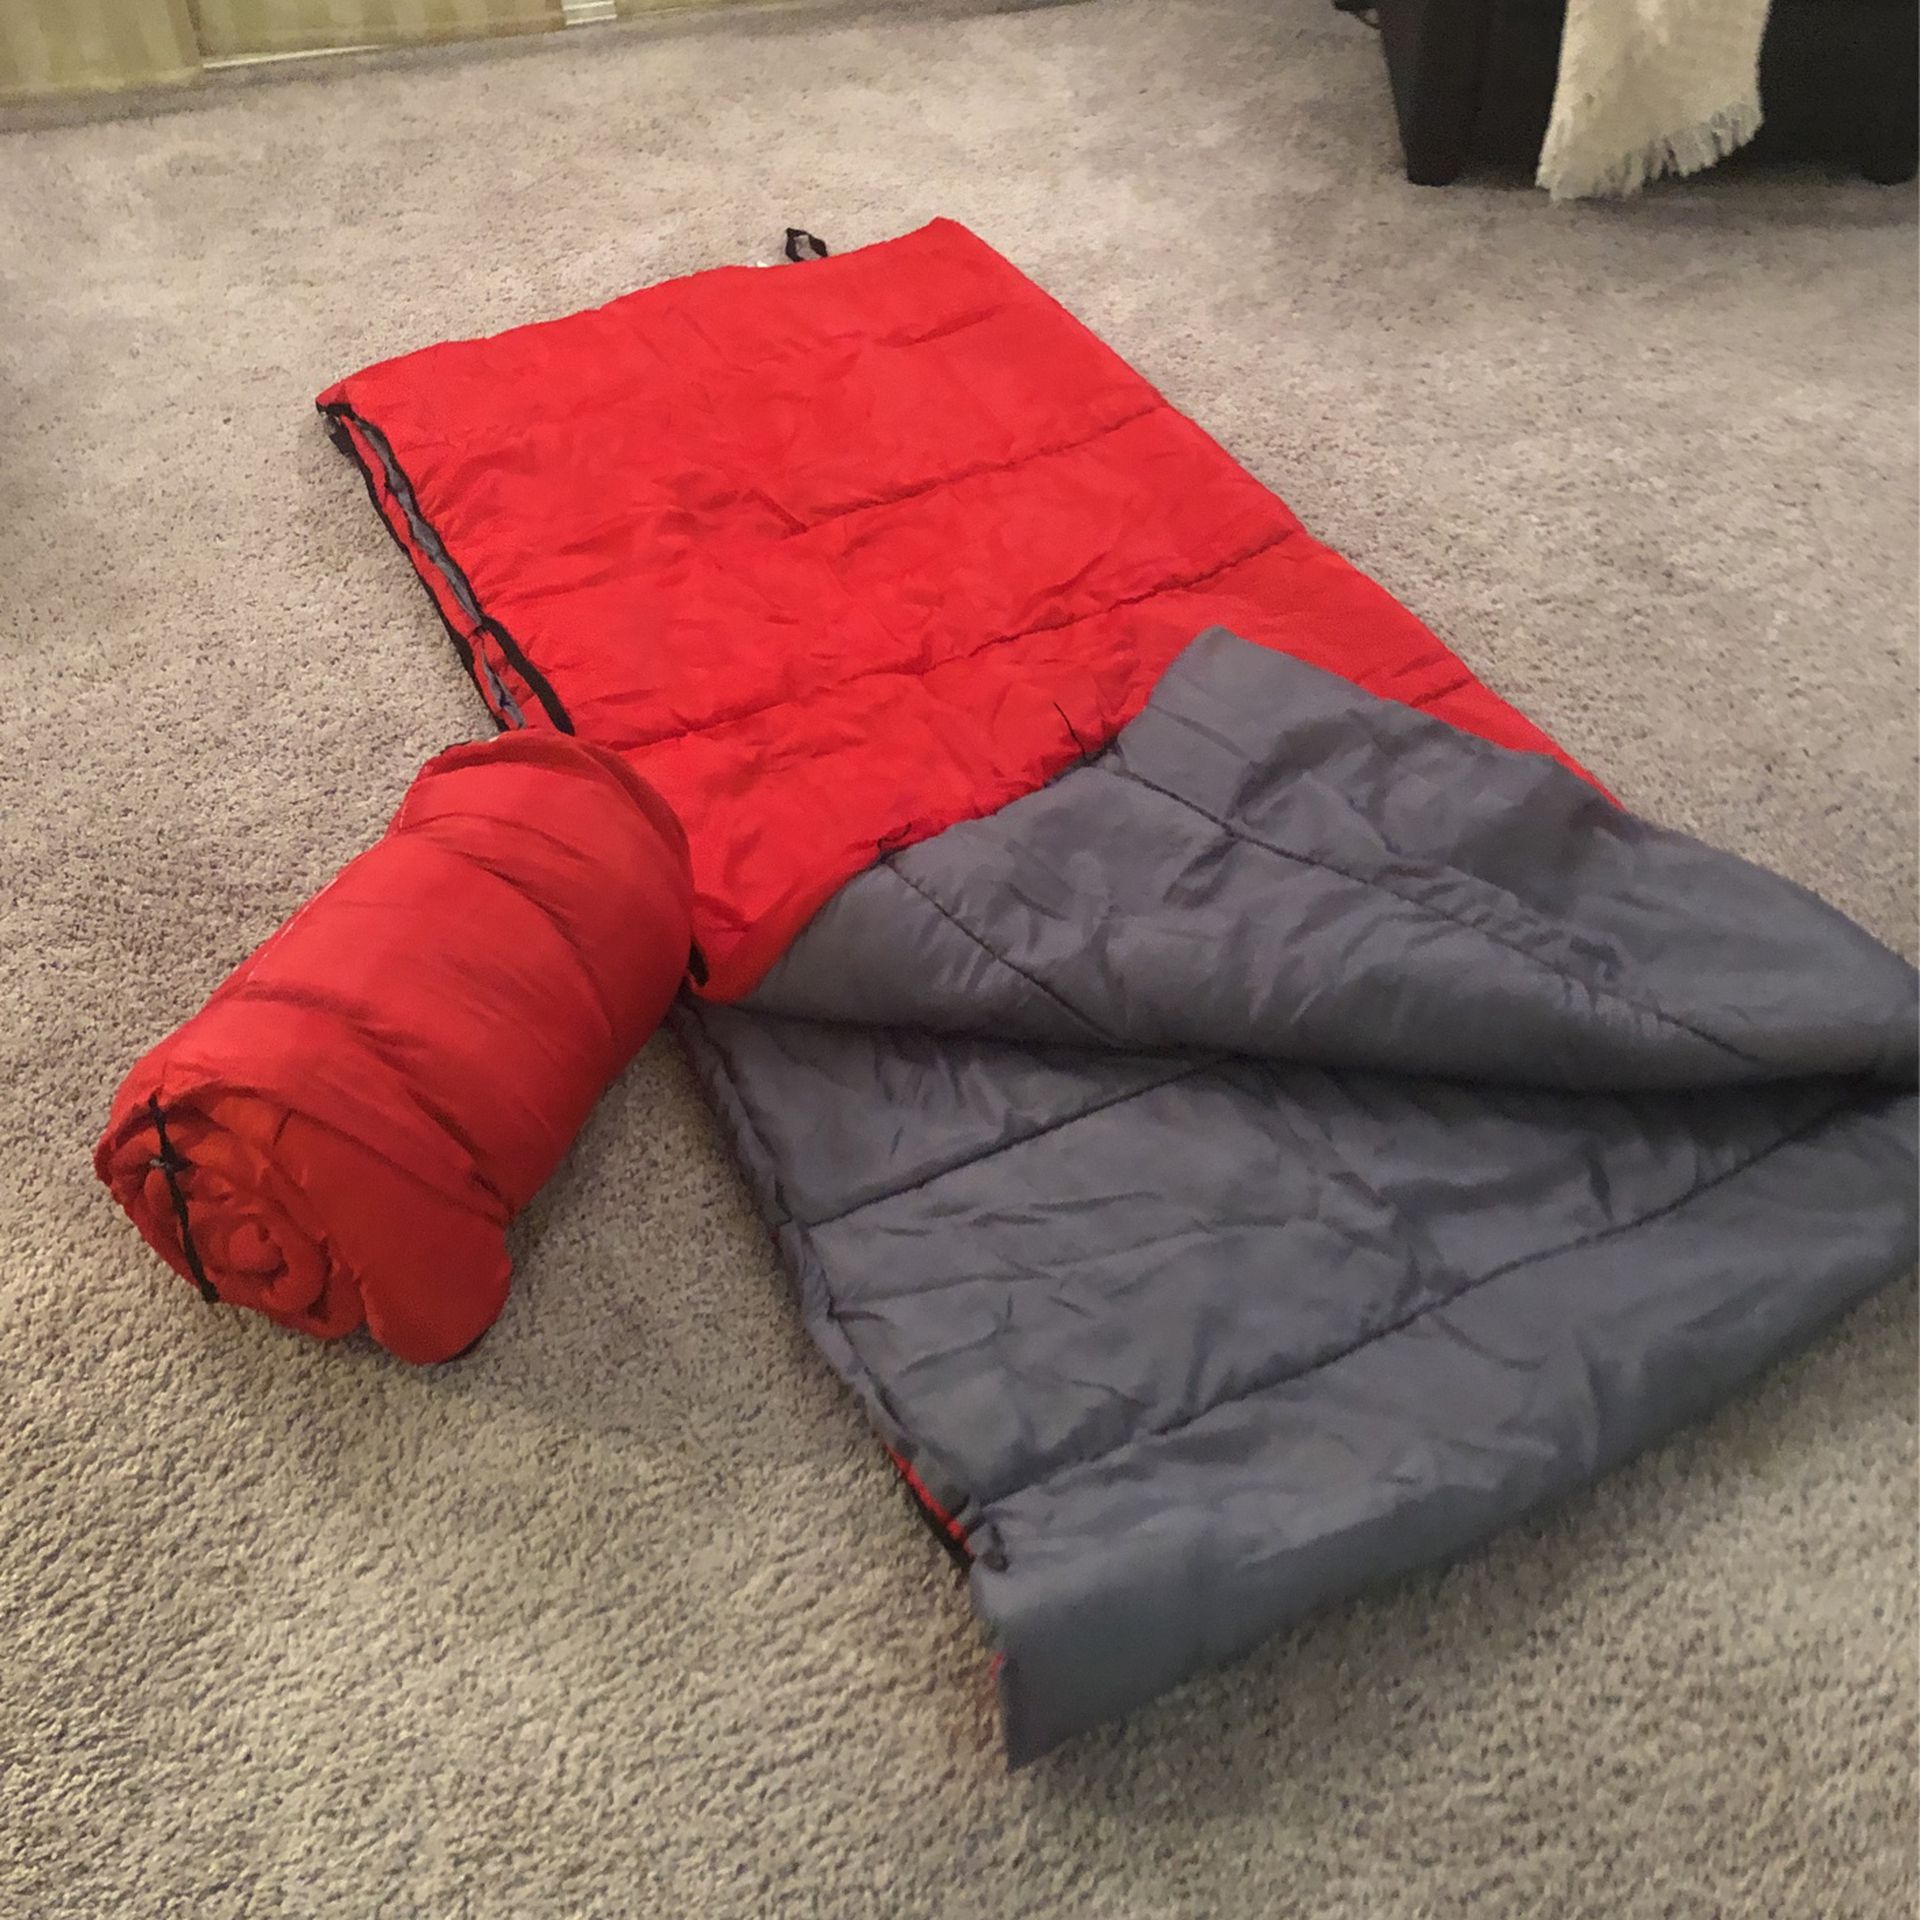 2-Youth Sized Sleeping Bags